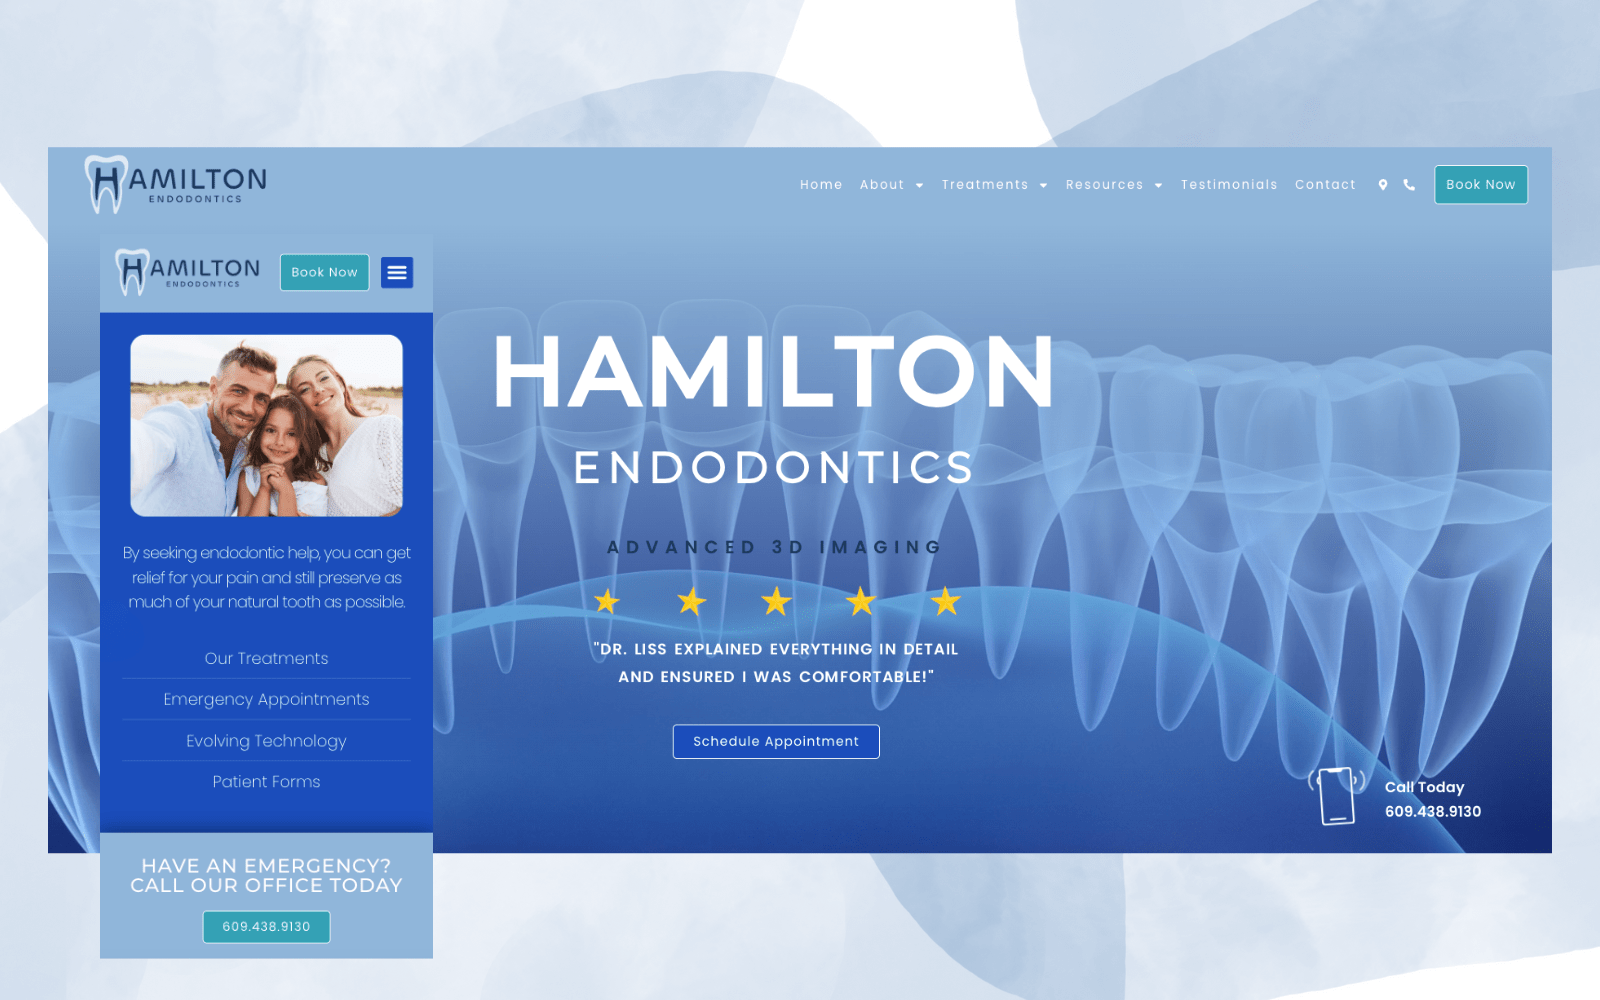 A sleek and modern website design for Hamilton Dentistry specializing in endodontics services.